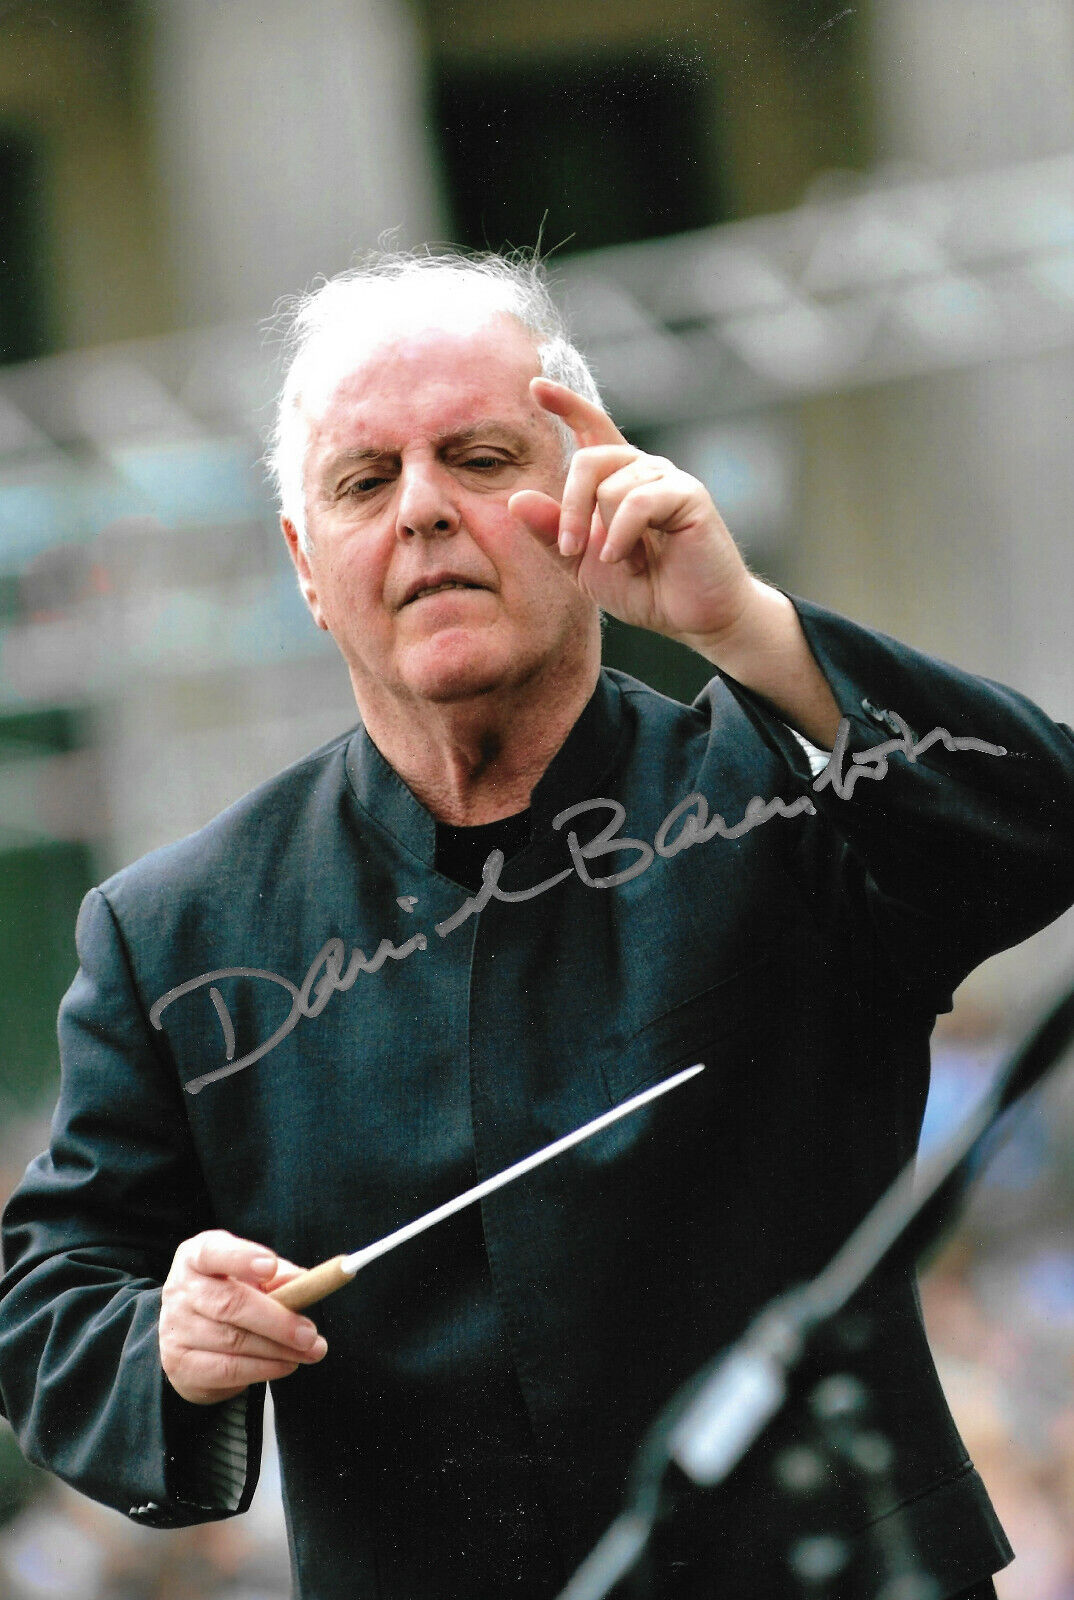 Daniel Barenboim Conductor signed 8x12 inch Photo Poster painting autograph